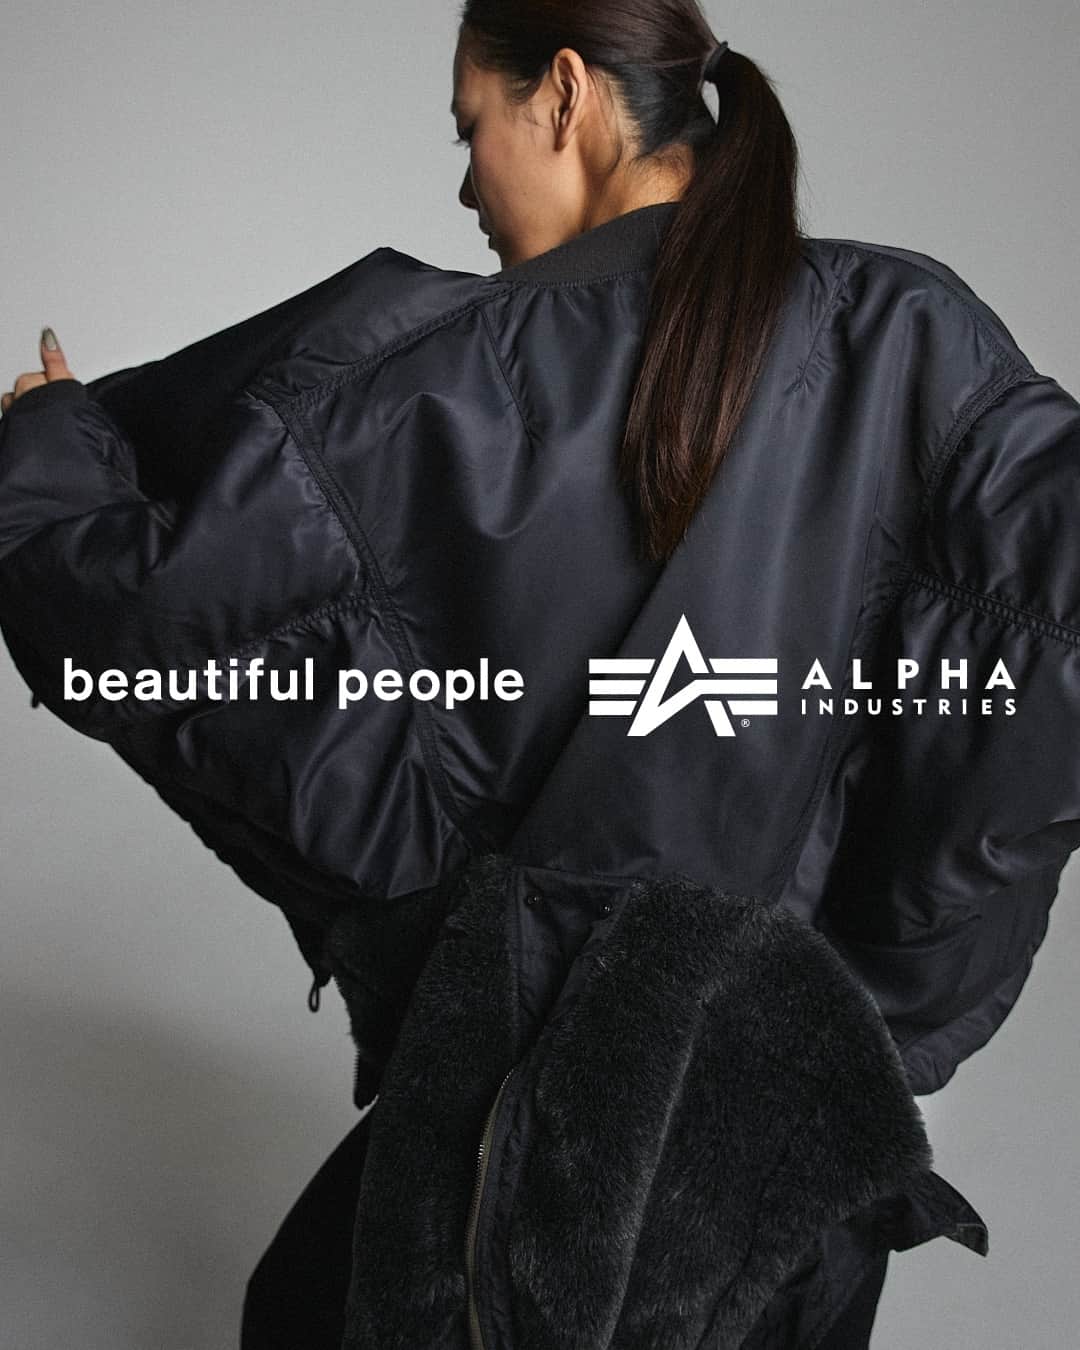 ビューティフルピープルさんのインスタグラム写真 - (ビューティフルピープルInstagram)「#DOUBLEEND beautiful people x ALPHA INDUSTRIES @alphaindustries @alpha_industries_japan⁠ 4-WAY flight jacket⁠ ⁠ ◻︎ ⁠beautiful people x ALPHA INDUSTRIES double-end nylon flight jacket⁠ color: ⁠gray*navy⁠ size: ⁠34/36/38/40/42⁠ material: ⁠nylon 100%⁠ ALPHA INDUSTRIESとのコラボレーションブルゾン。上下逆さまに着用することで、N-2BがMA-1へと変化します。さらにリバーシブルで着用することで、オリジナルのネイビーカラーに。⁠ 確かな実績を誇るALPHA縫製工場にて作成された本格仕様です。ダブルエンドならではのボリューム感とデザインのありそうでない1着に。⁠ ⁠ ⁠ ALPHA INDUSTRIES and beautiful people have collaborated for the first time to launch a new 4-way bomber jacket with authentic military specifications.⁠ ⁠ Inspired by a test sample of a 1958 N-2B flight jacket, which was never released to the public, and ALPHA's signature MA-1 vintage flight army, this bomber jacket is a surprising 4-way specification that can be worn inside-out and upside-down.⁠ ⁠ ___⁠ ⁠ ⁠ ■Online store⁠ www.beautiful-people.jp⁠ ⁠ ■Global Online store⁠ www.beautiful-people-creations-tokyo.com⁠ ⁠ ■ 青山店⁠⁠⁠⁠ 東京都港区南青山3-16-6⁠⁠⁠⁠ ⁠⁠⁠⁠ ■ 新宿伊勢丹店⁠ 伊勢丹新宿店本館2階⁠ TOKYOクローゼット/リ・スタイルTOKYO⁠⁠⁠⁠ ⁠⁠⁠⁠ ■ 渋谷PARCO店⁠ 渋谷パルコ2階⁠ ⁠ ■ ジェイアール名古屋タカシマヤ店⁠ ジェイアール名古屋タカシマヤ4階⁠ モード＆トレンド「スタイル＆エディット」⁠⁠⁠⁠ ⁠⁠⁠⁠ ■⁠阪急うめだ店⁠ 阪急うめだ本店3階　モード⁠⁠⁠⁠ ___⁠ ⁠ #beautifulpeople⁠⁠⁠ #ビューティフルピープル⁠⁠⁠ #SideC ⁠ #DOUBLEEND⁠ #ダブルエンド⁠ #collaboration⁠ #コラボ⁠ #MA1⁠ #N2B⁠ #reversible⁠ #4way⁠ #flightjacket⁠ #blouson⁠ #ALPHAINDUSTRIES⁠ #ALPHA」10月15日 7時00分 - beautifulpeople_officialsite